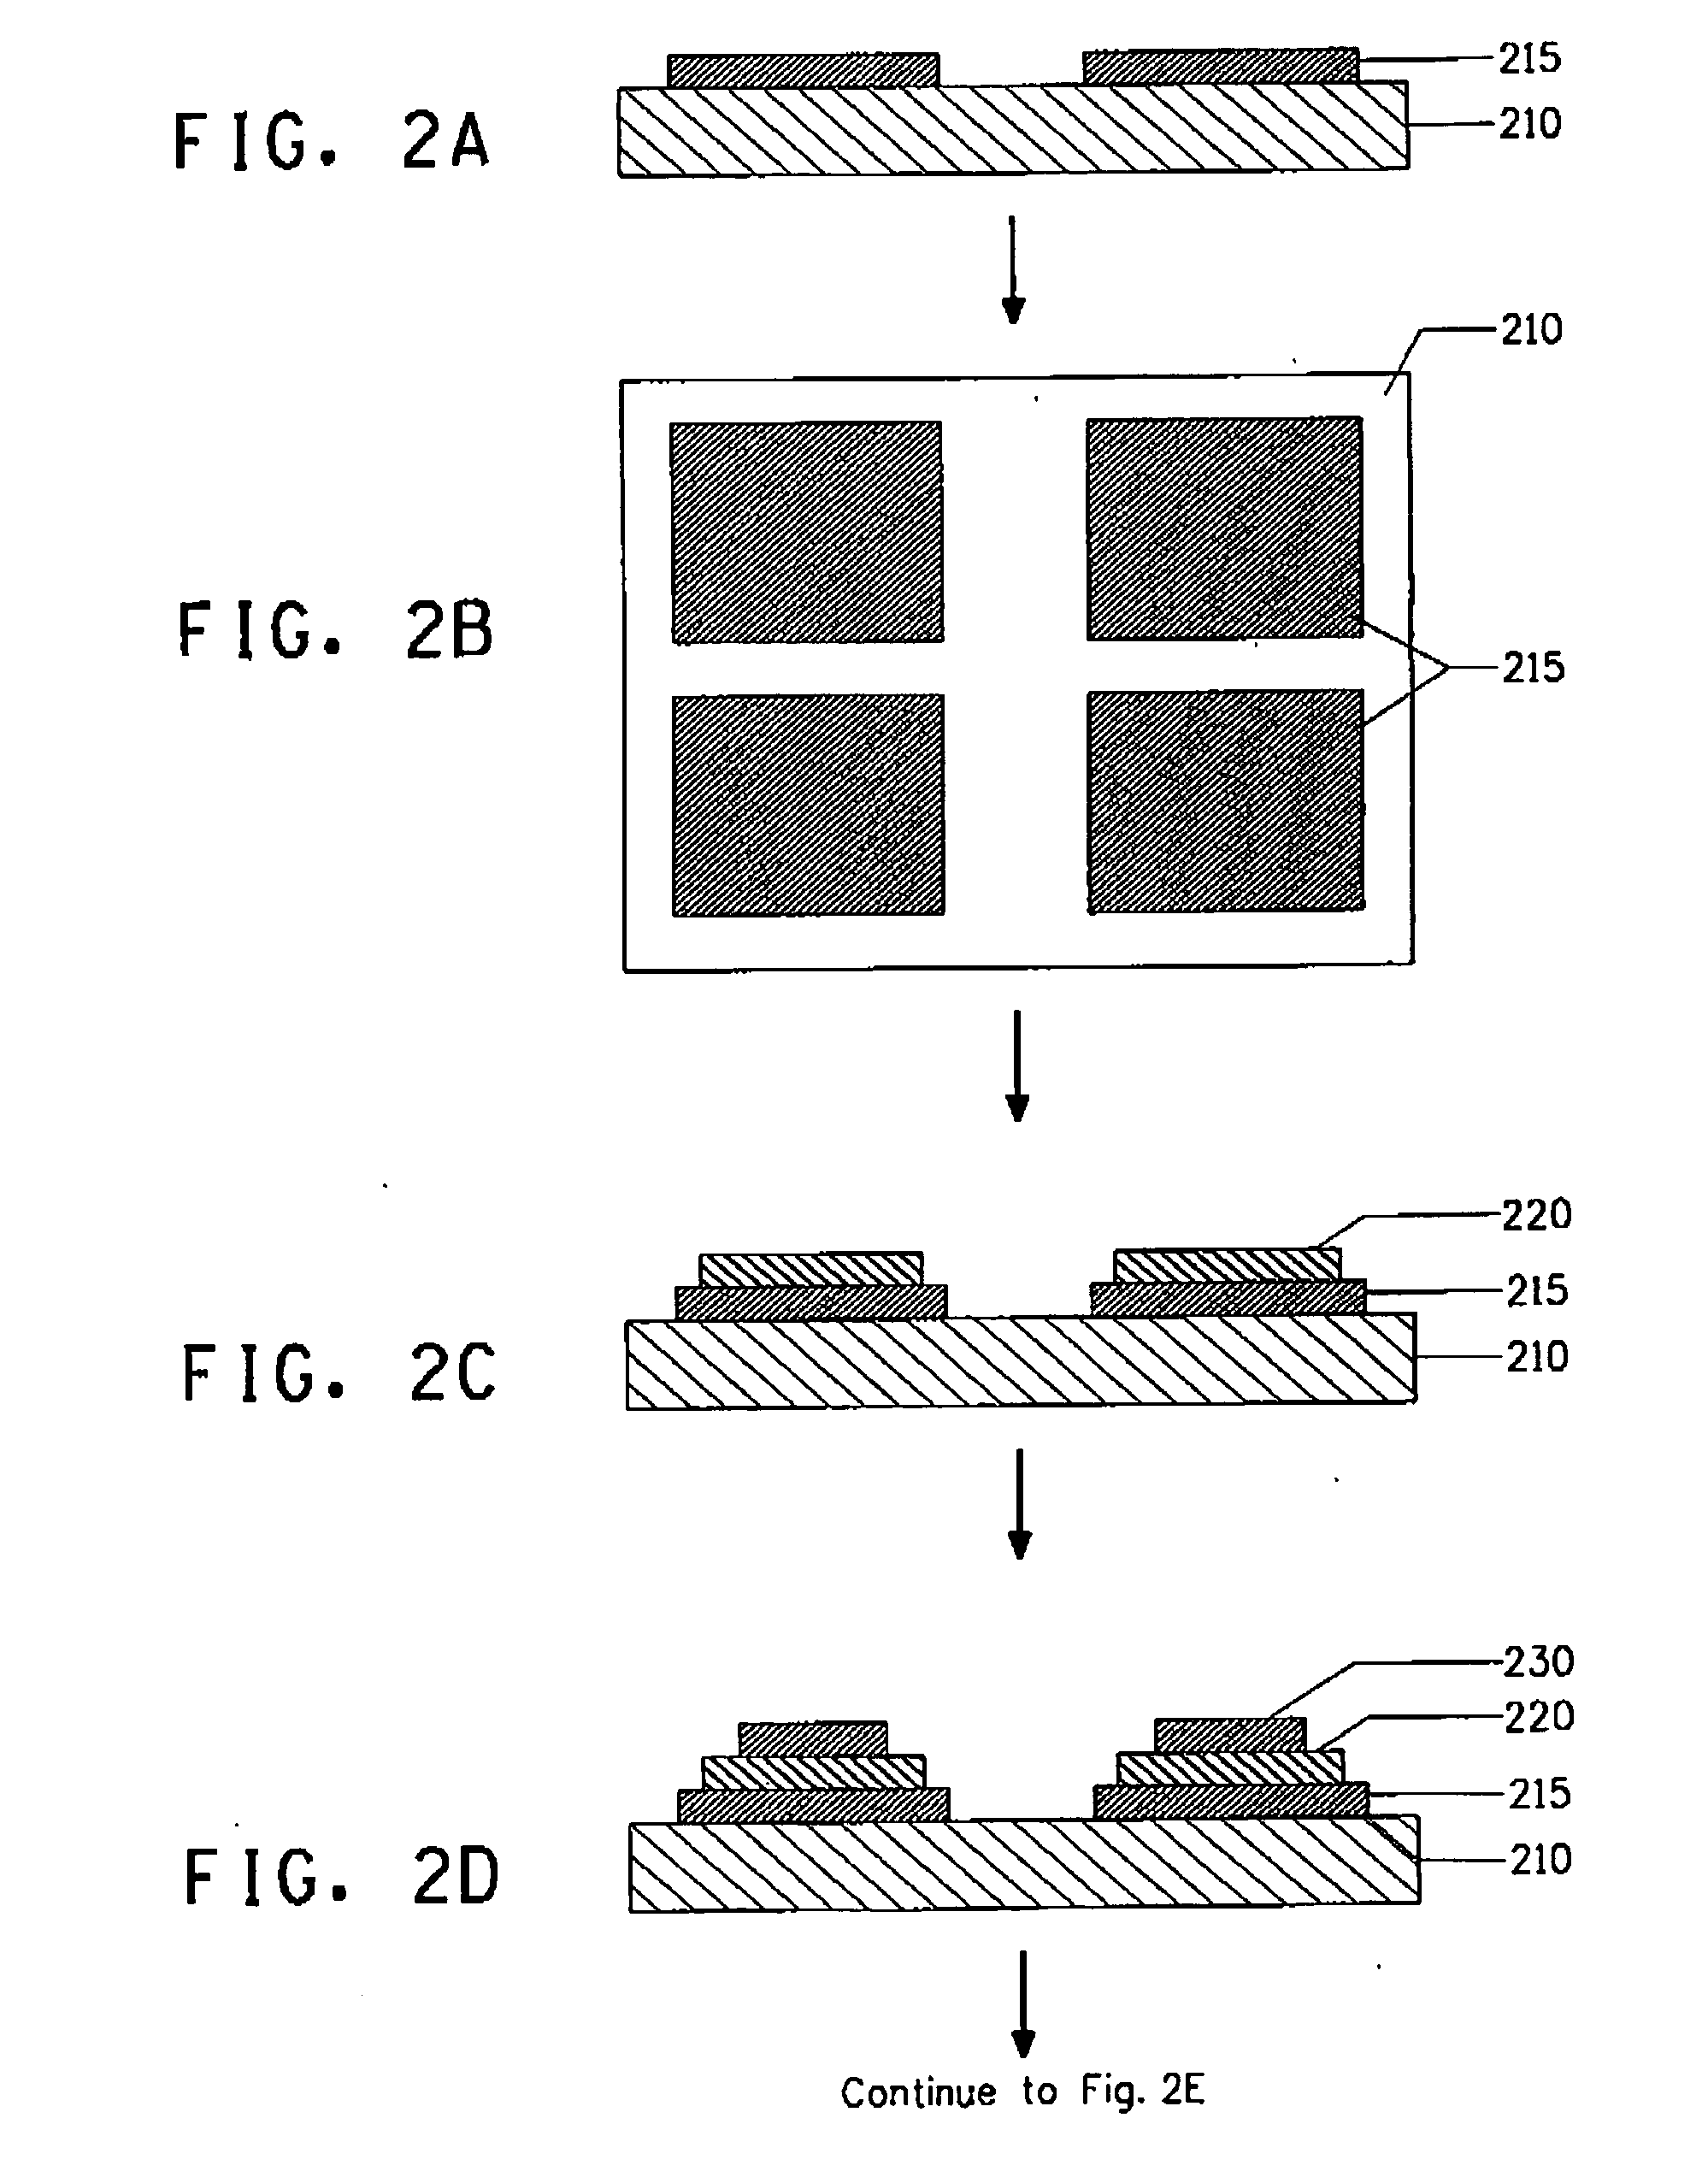 Hydrophobic crosslinkable compositions for electronic applications